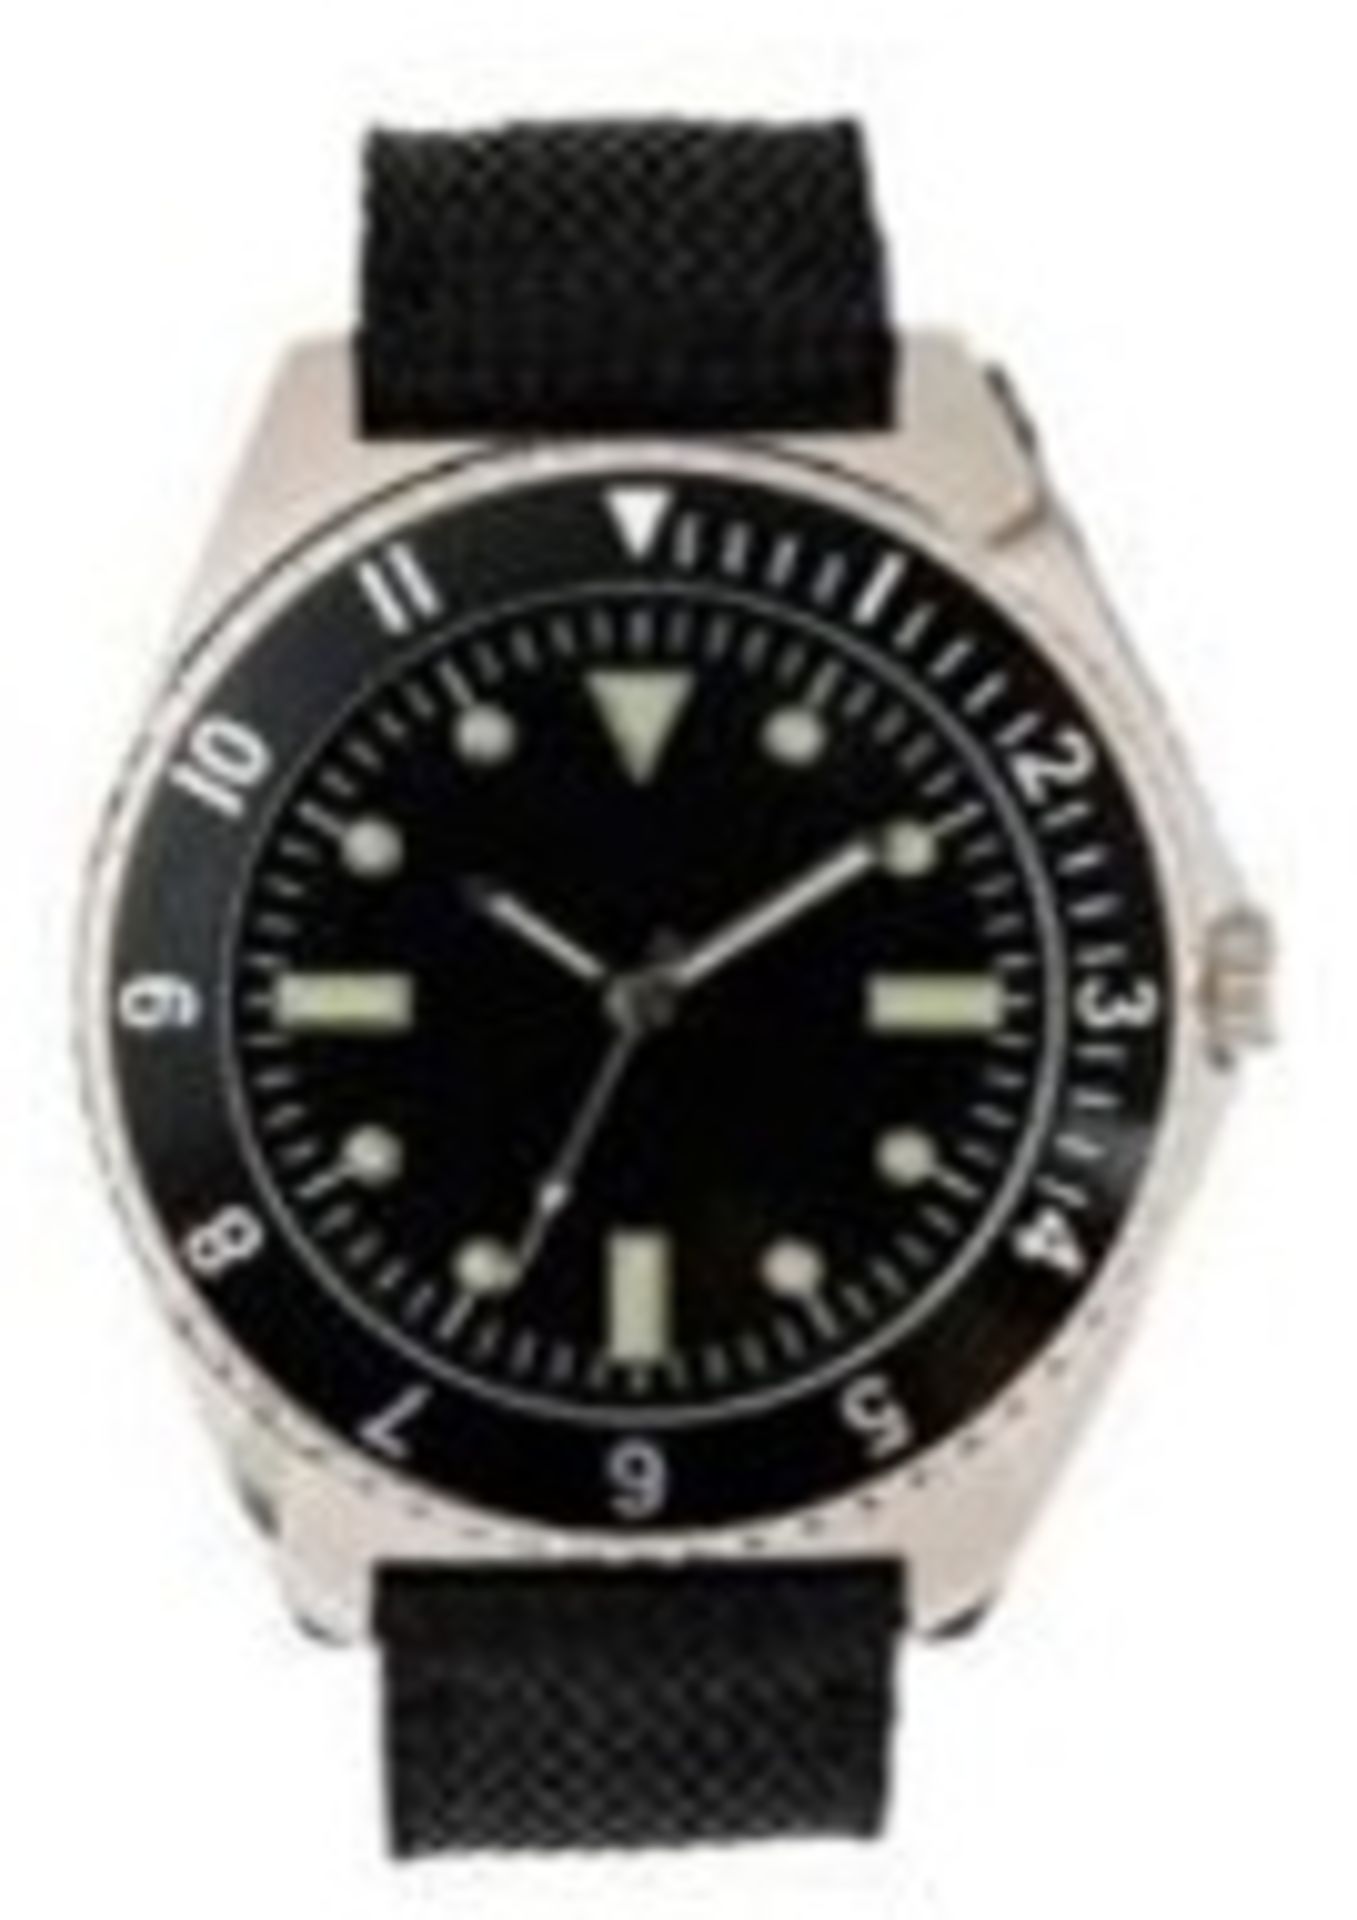 V Brand New Gents 1970s US Navy Diver Watch with Engraved Back in Presentation Box